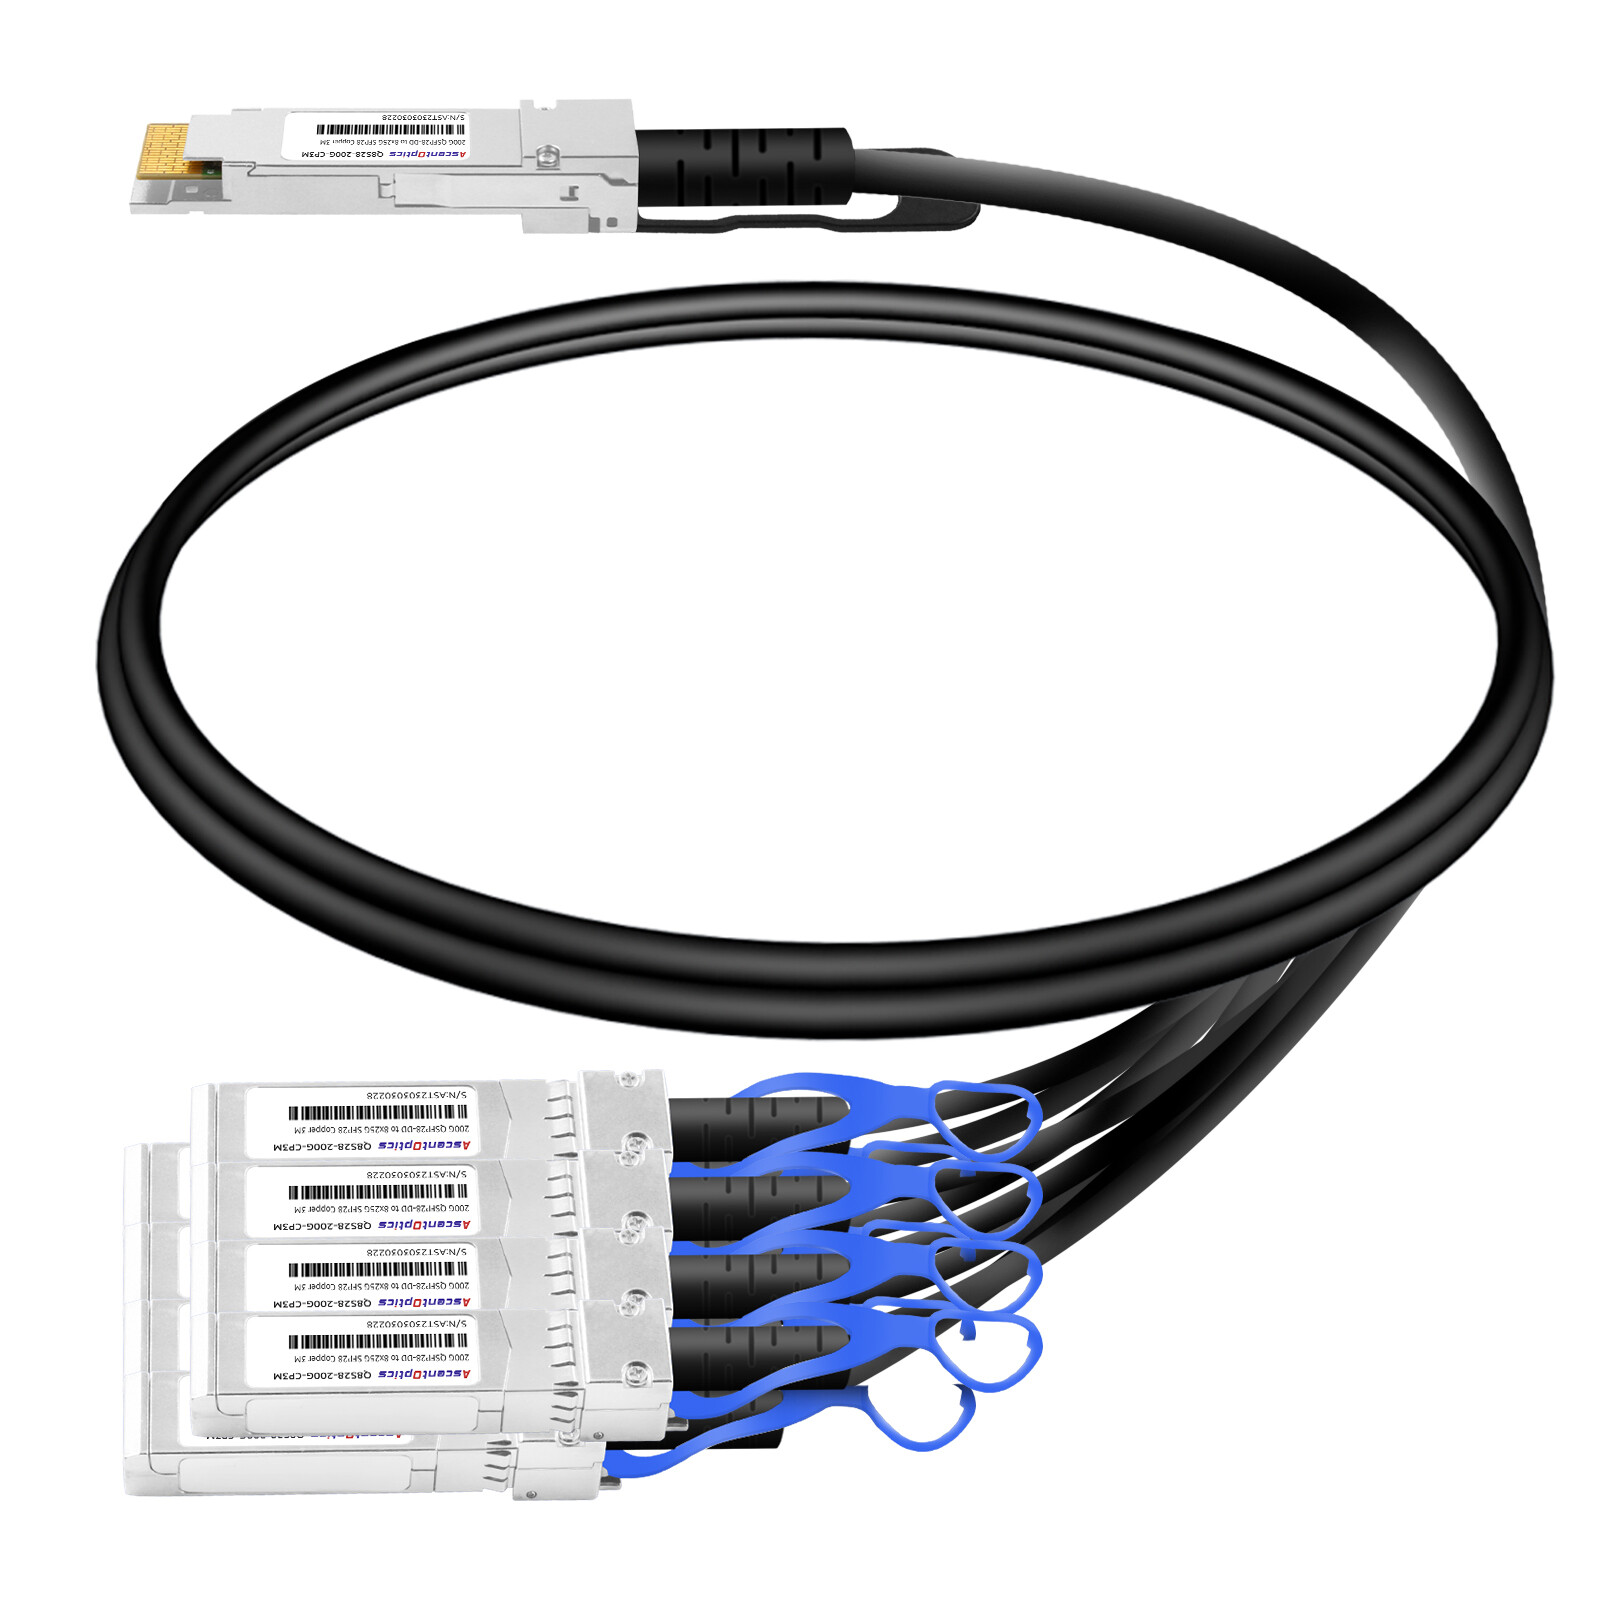 200G QSFP28-DD to 8x 25G SFP28 Copper Breakout Cable,3 Meters,Passive